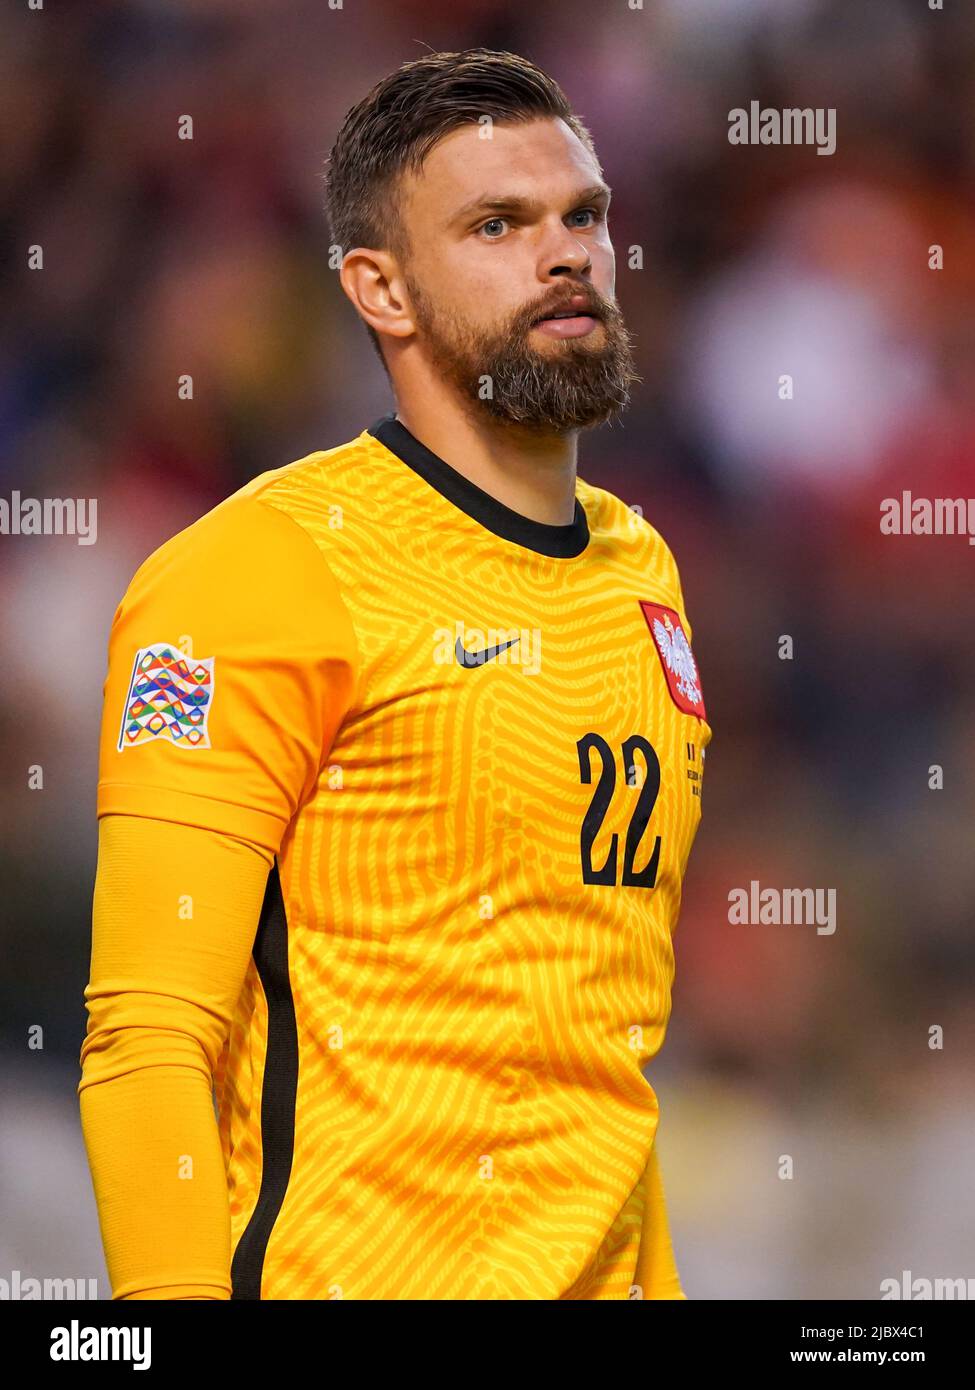 BRUSSELS, BELGIUM - JUNE 8: goalkeeper Bartlomiej Dragowski of Poland during the UEFA Nations League A Group 4 match between the Belgium and Poland at the Stade Roi Baudouin on June 8, 2022 in Brussels, Belgium (Photo by Joris Verwijst/Orange Pictures) Stock Photo